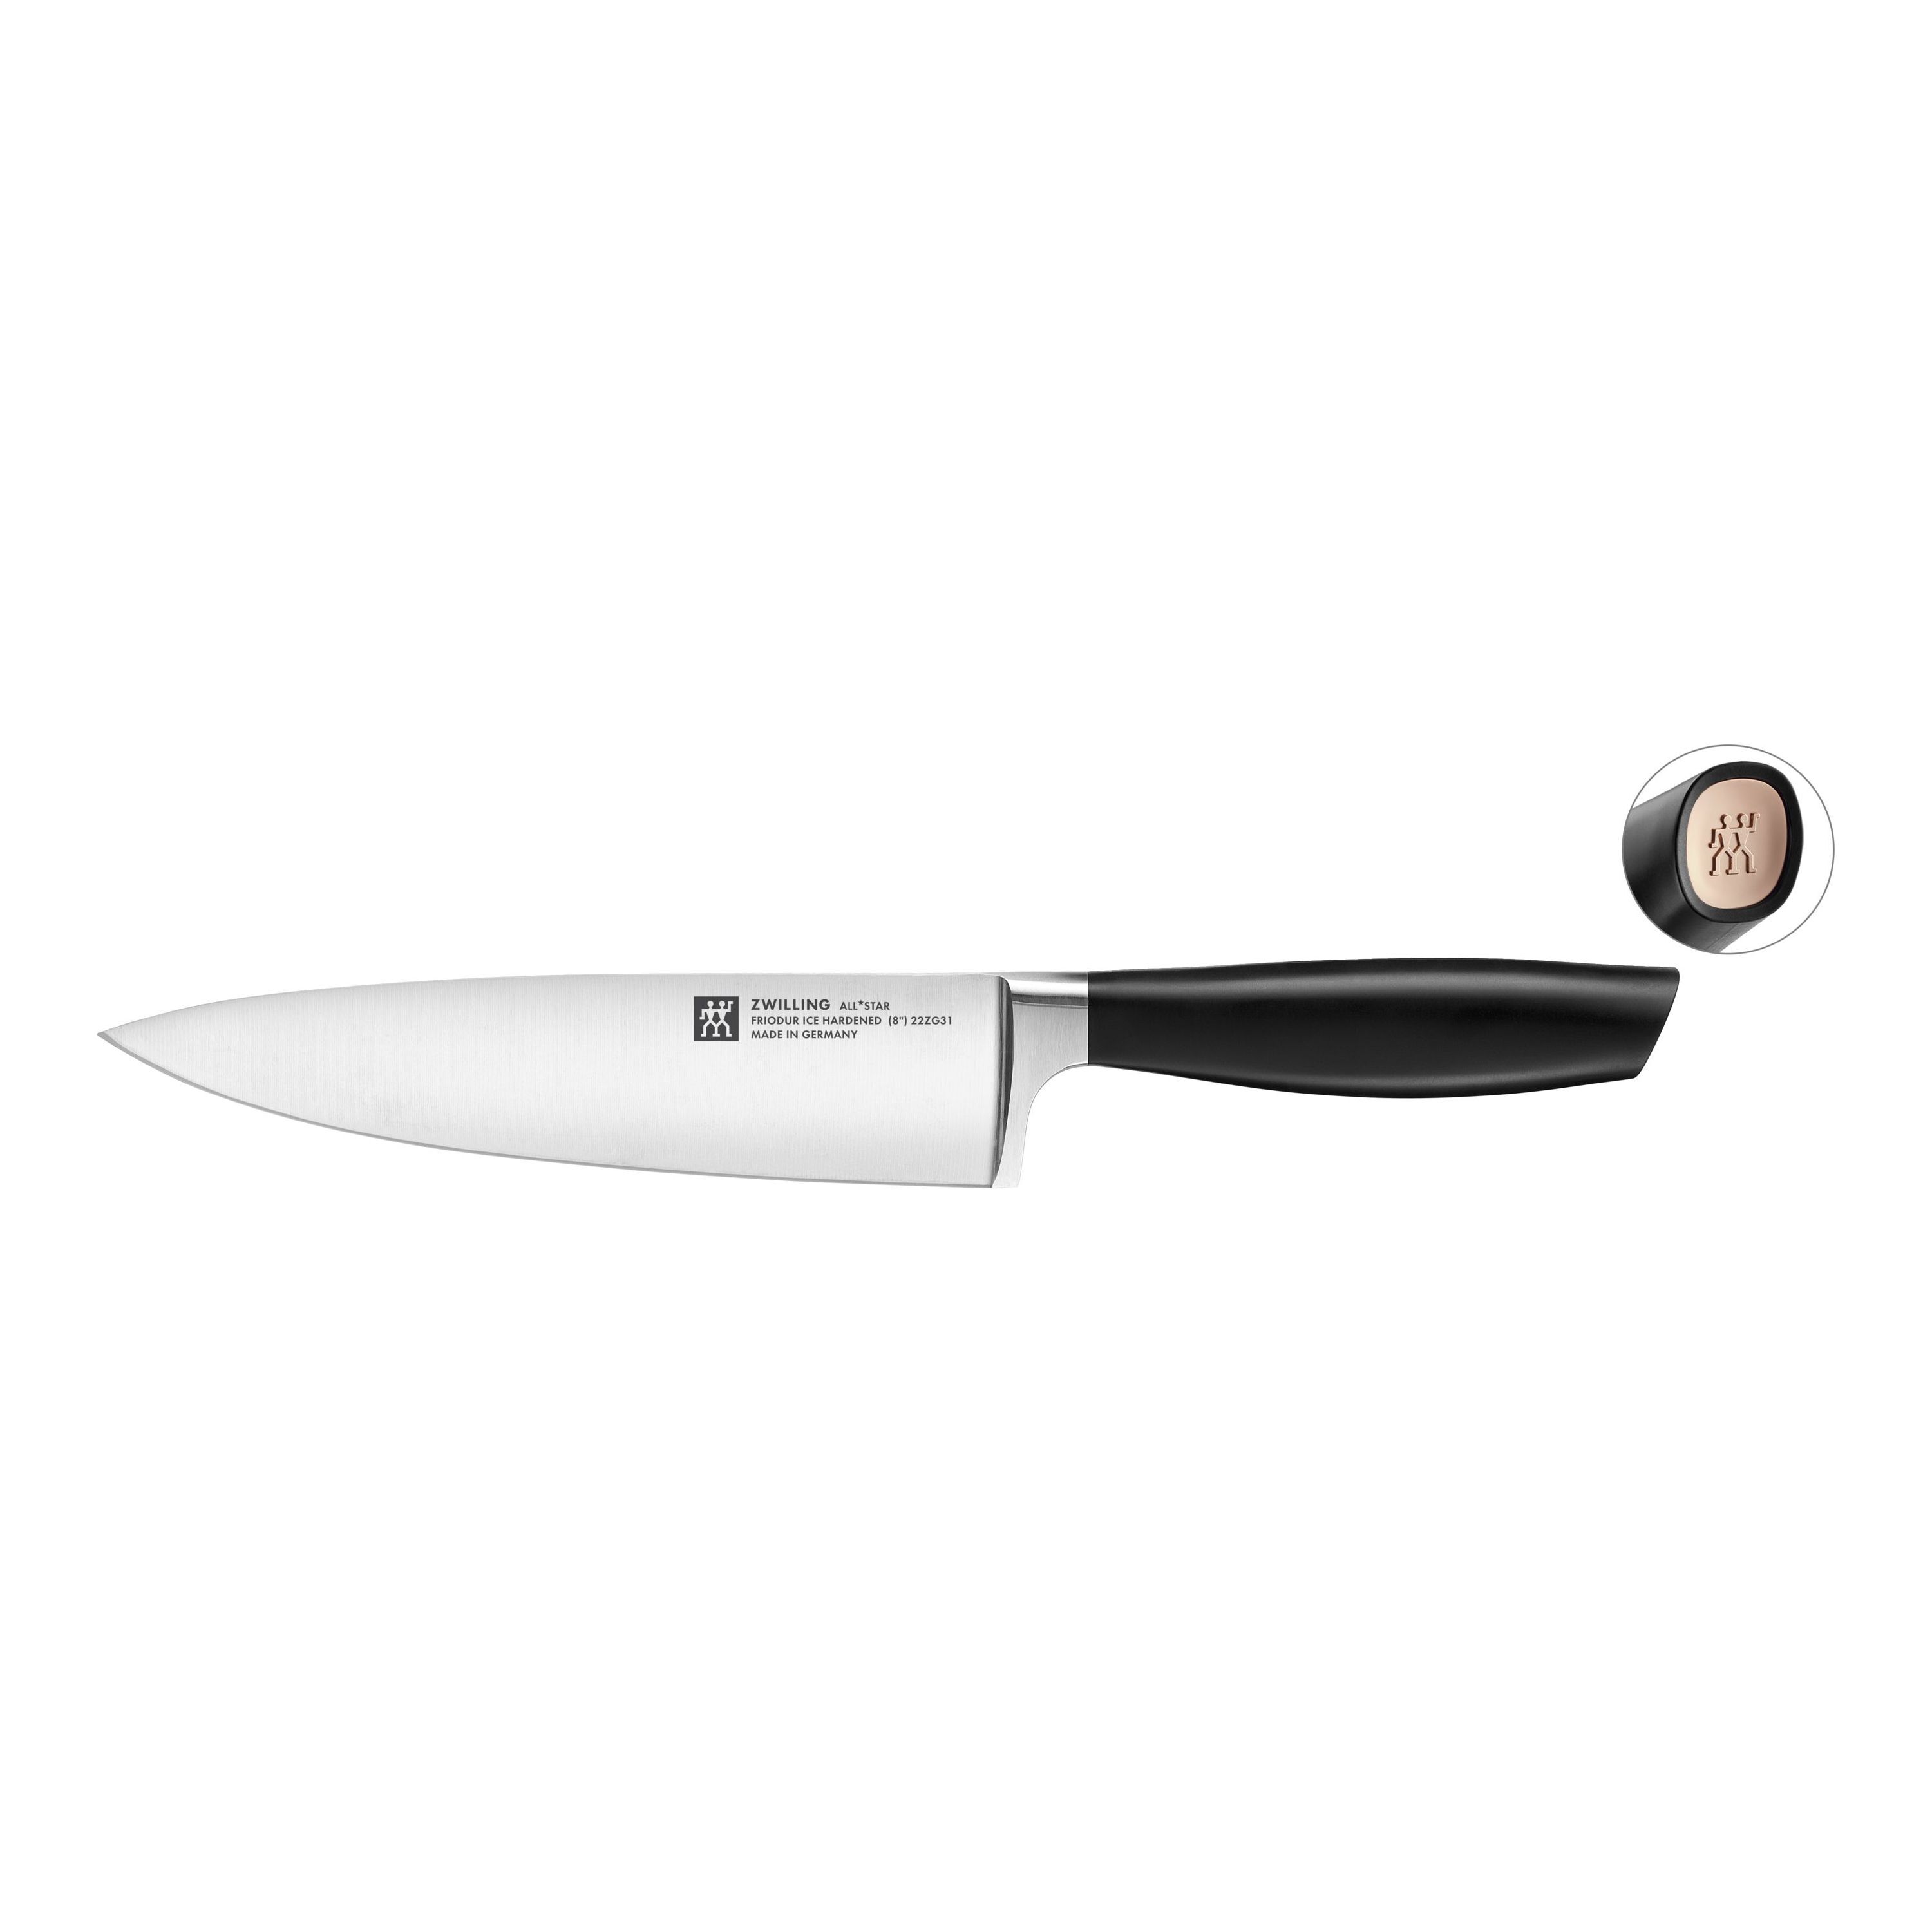 ZWILLING All * Star Couteau de chef 20 cm, or rose